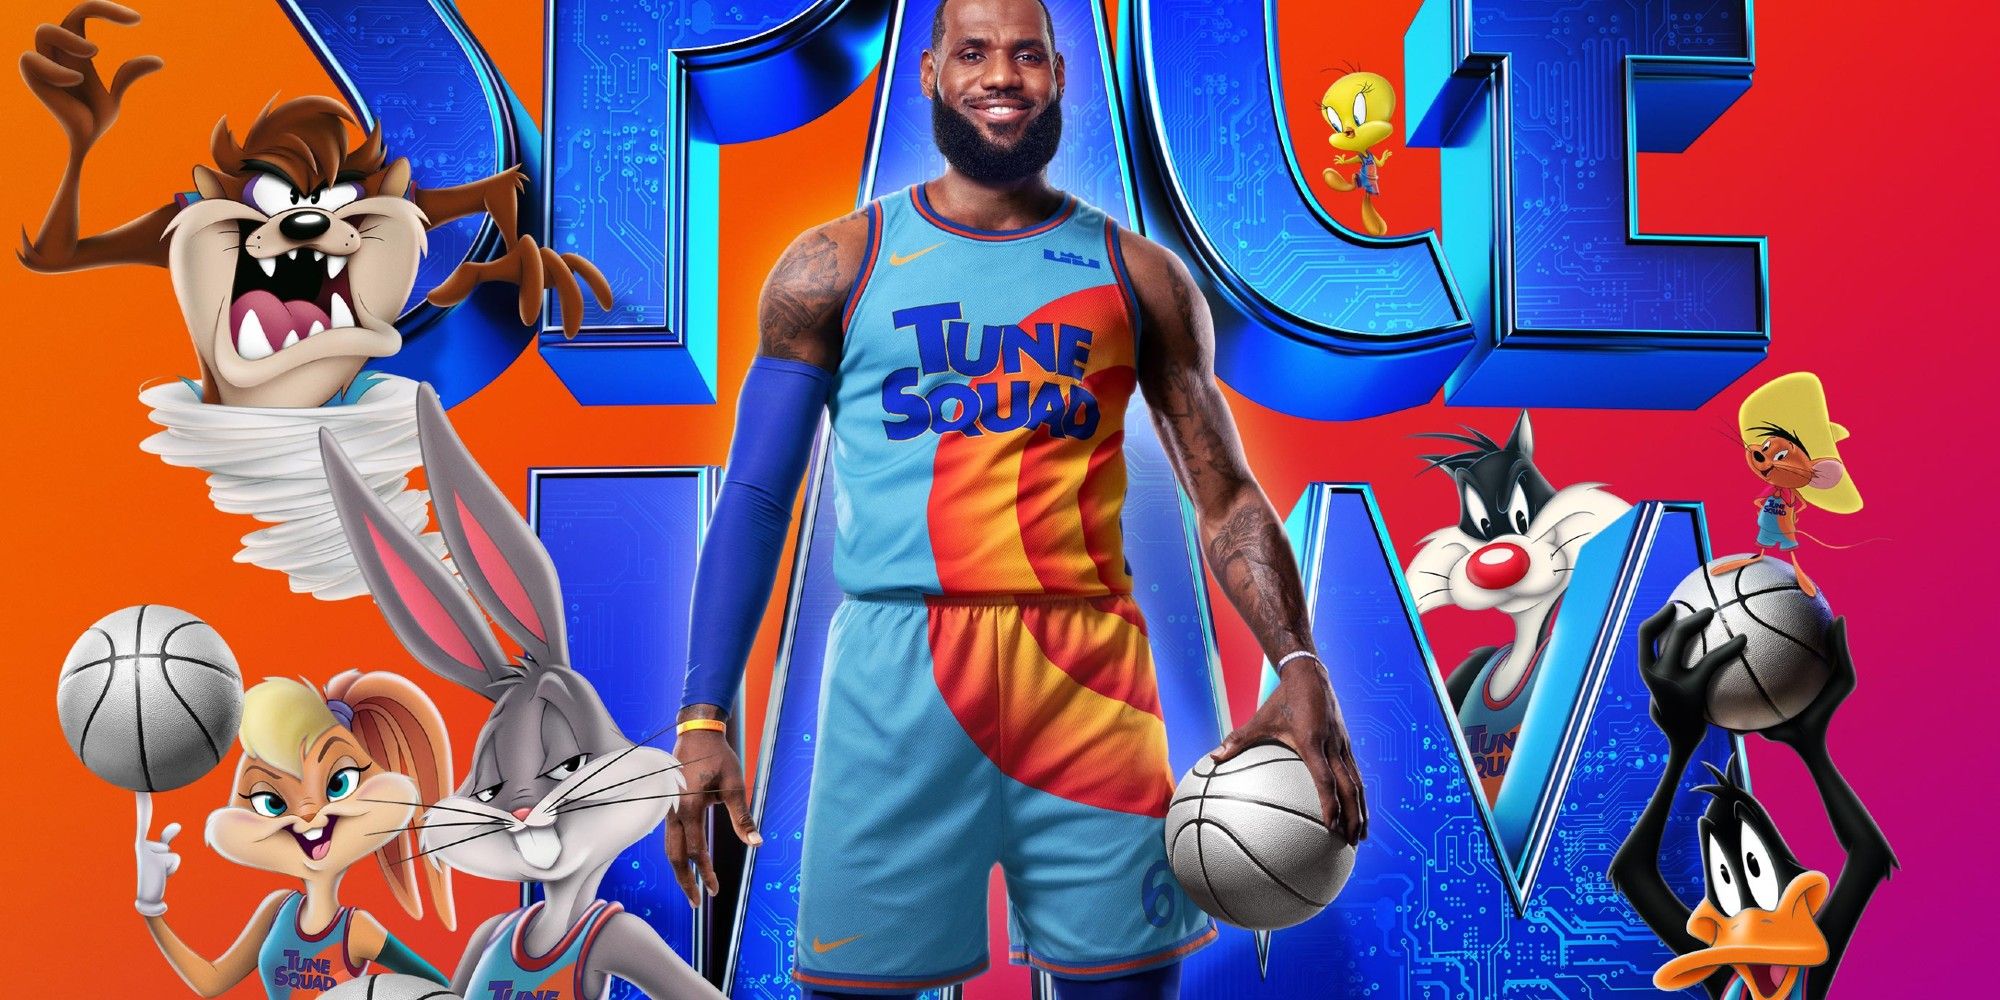 King James Dethroned: Space Jam Dropped a Whopping 77% Friday